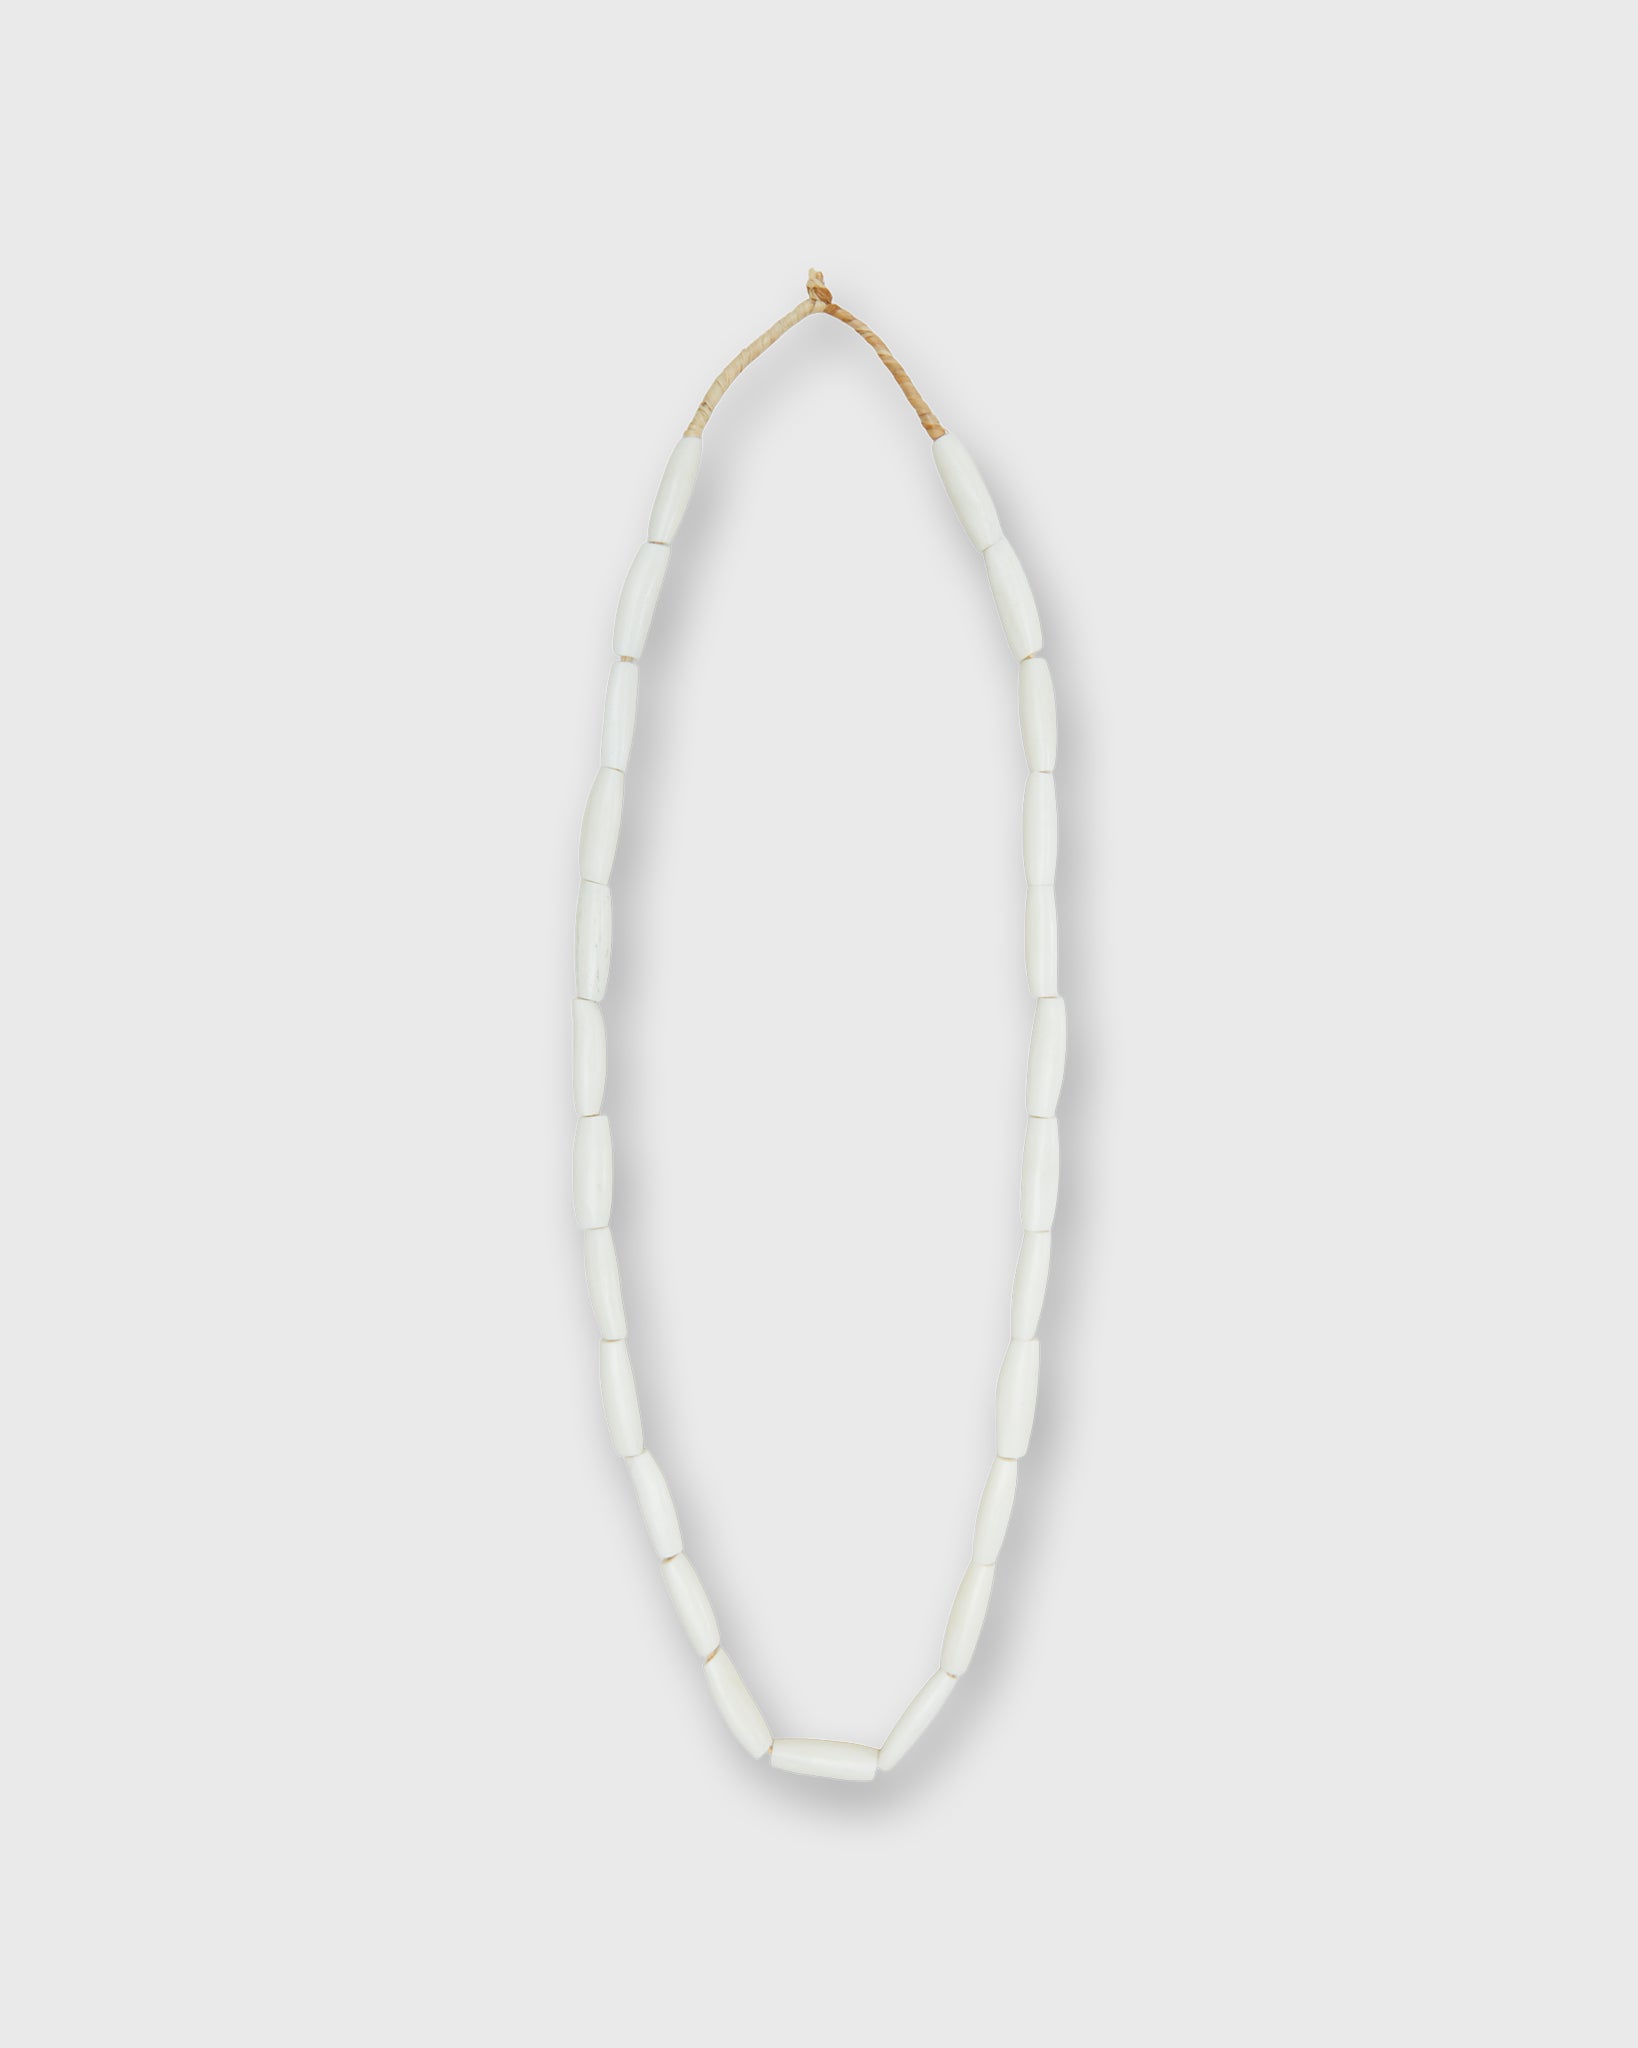 Small Elongated Cowbone Beads in Ivory